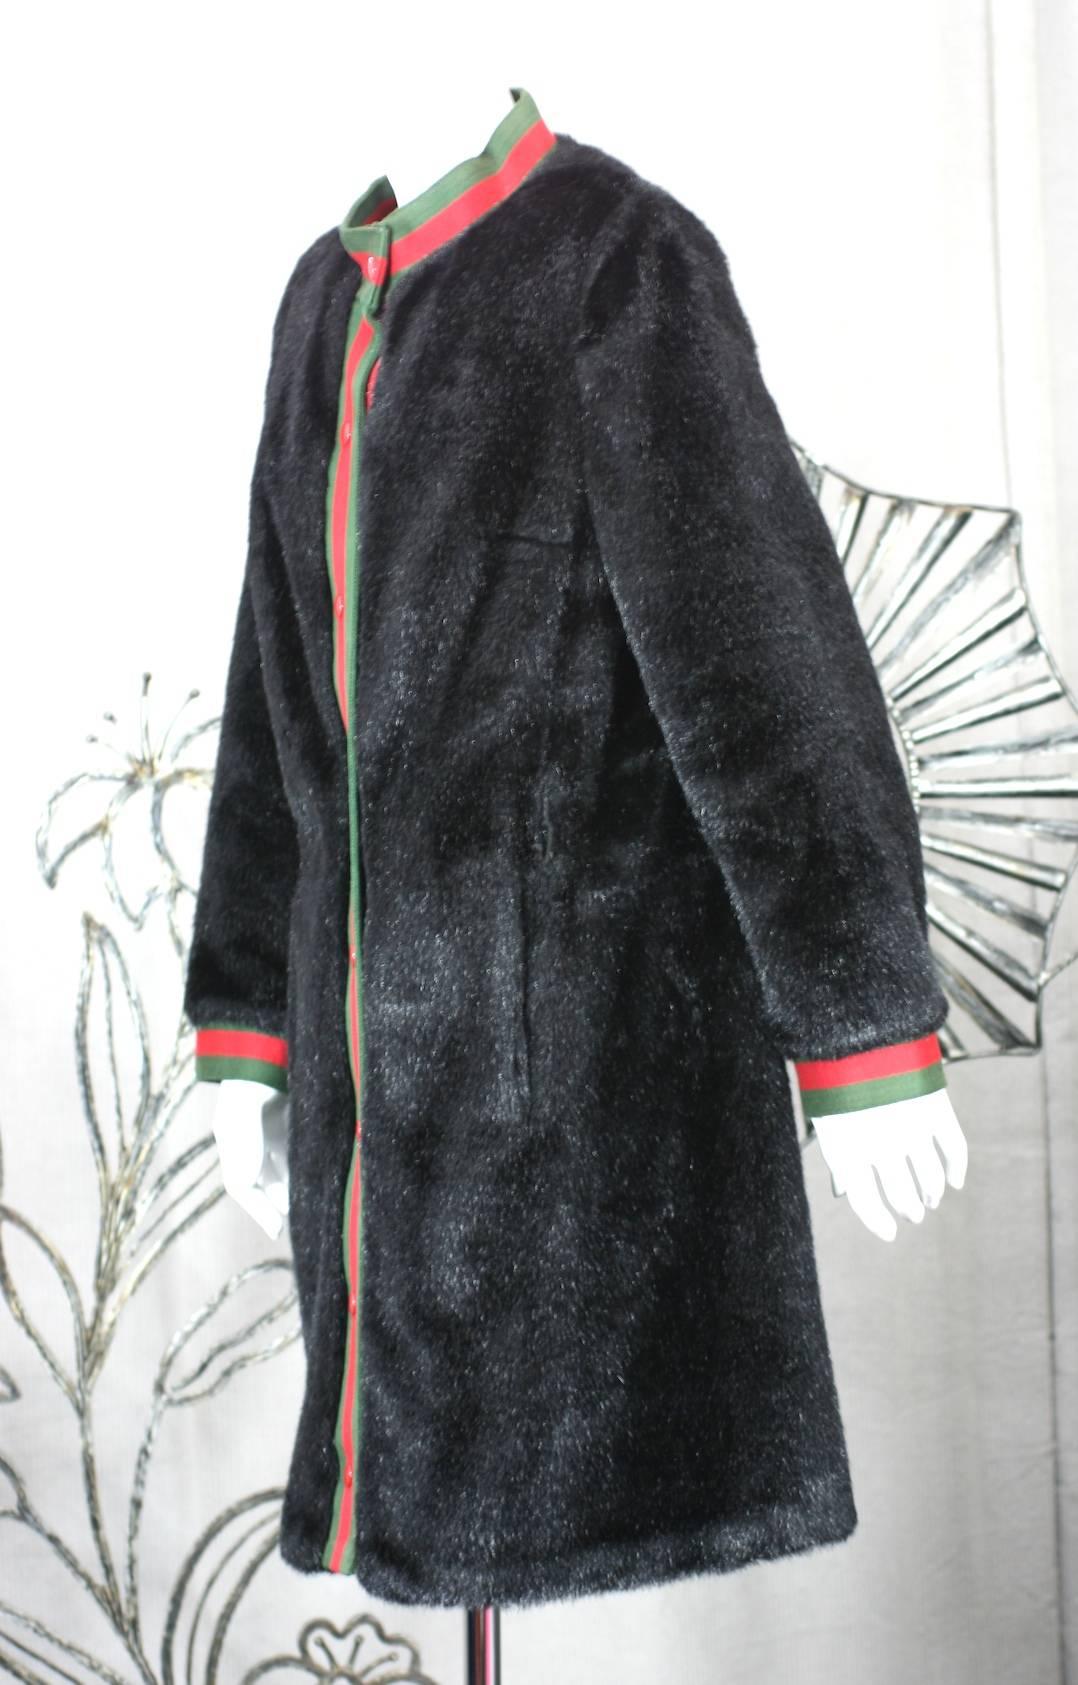 Before Calvin Klein established himself as an American Modernist designer, his company produced coats on 7th Ave.
American manufacturers looked to Europe back in the day and this coat is obviously influenced by Gucci. 
This Calvin Klein faux seal